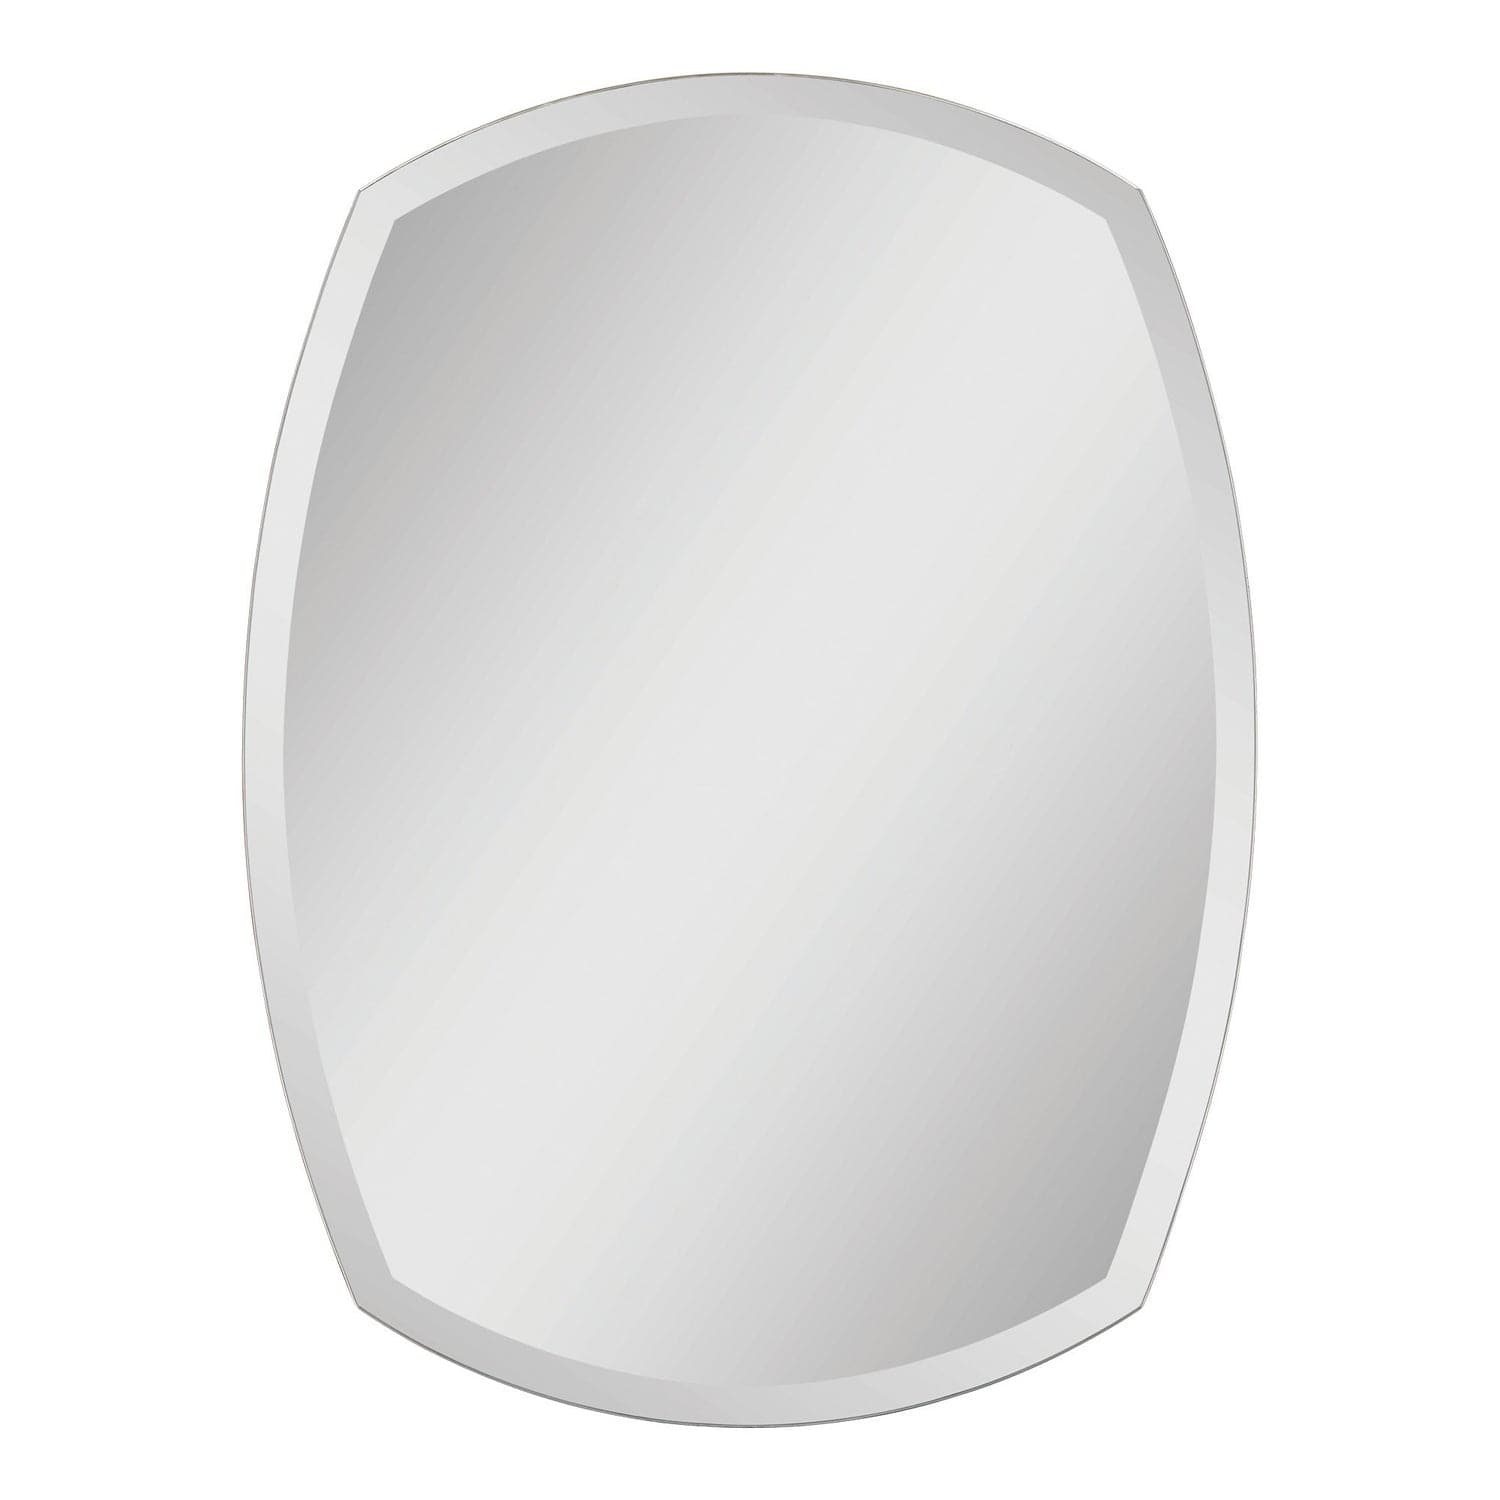 Renwil - MT950 - Mirror - Spalding - All Glass